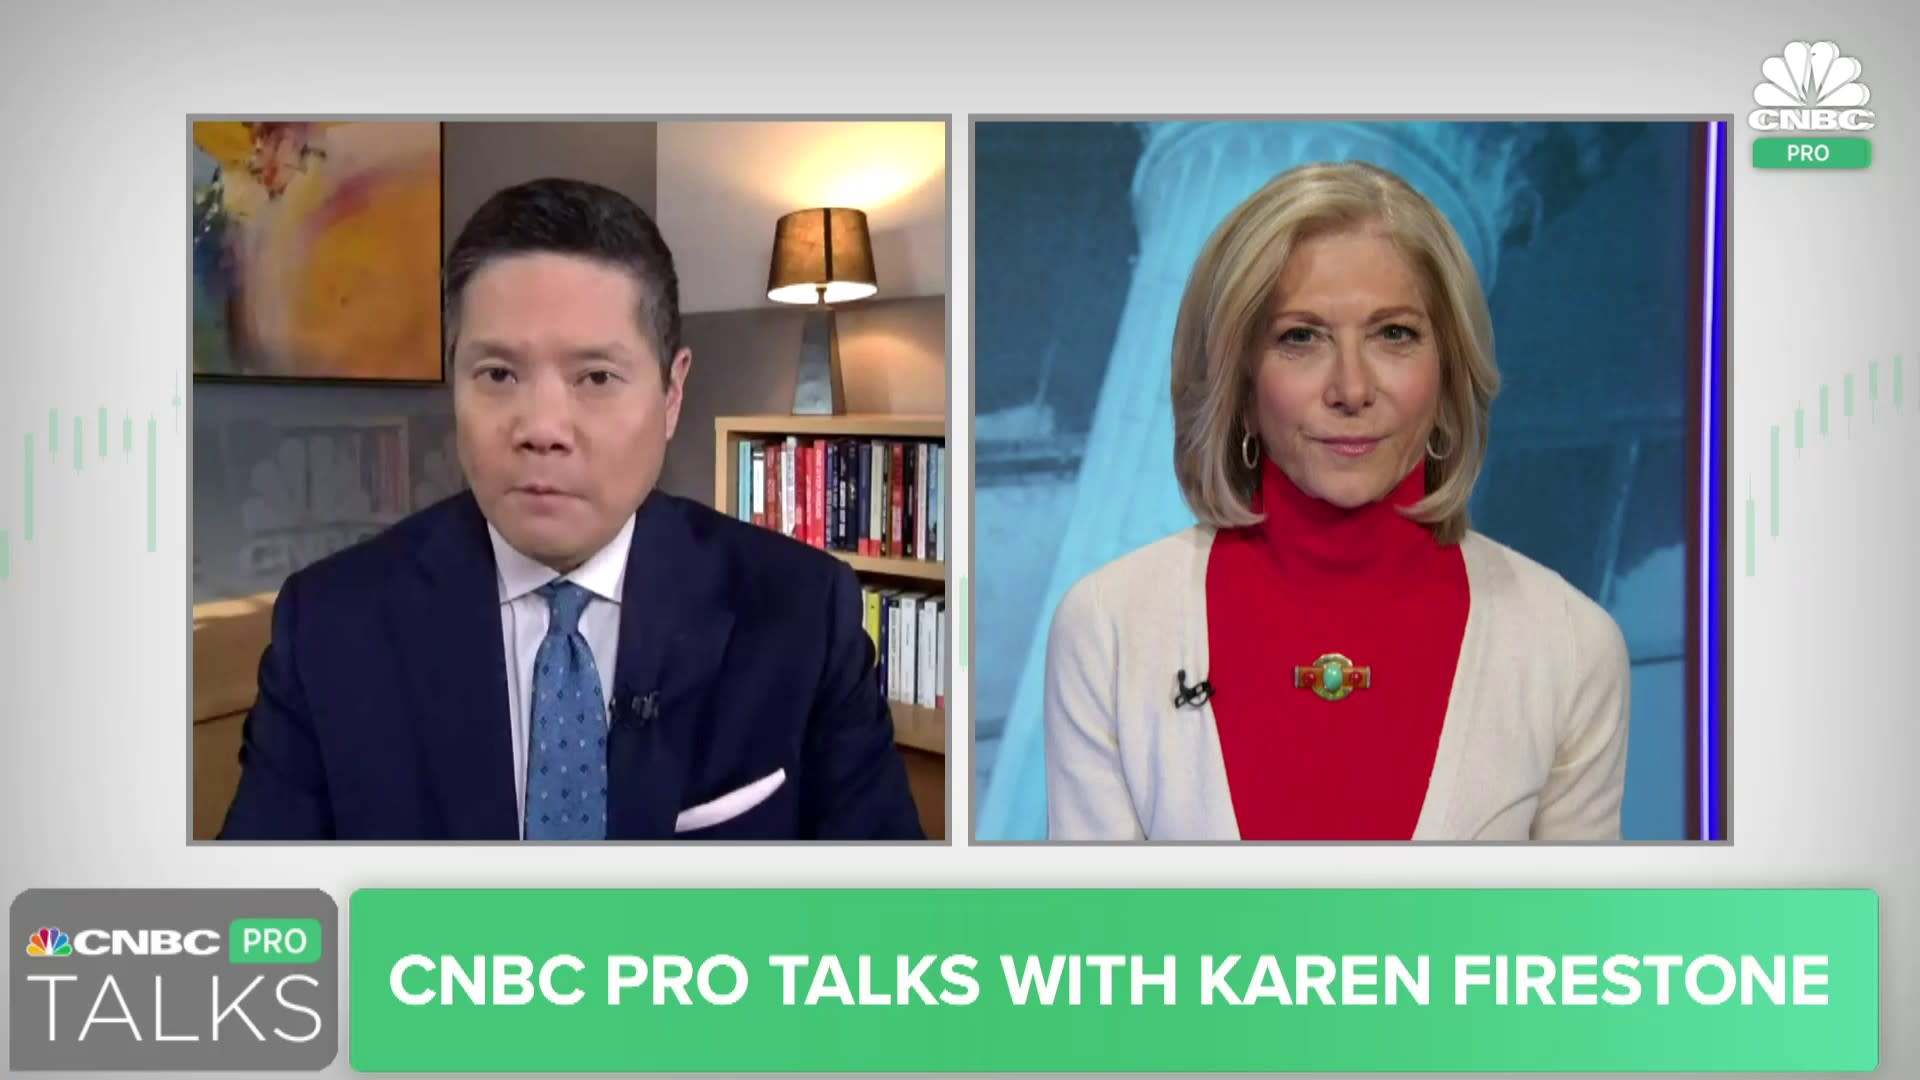 CNBC Pro Talks: Top investor Karen Firestone sees value in these 'in therapy' stocks making their way out of the doghouse